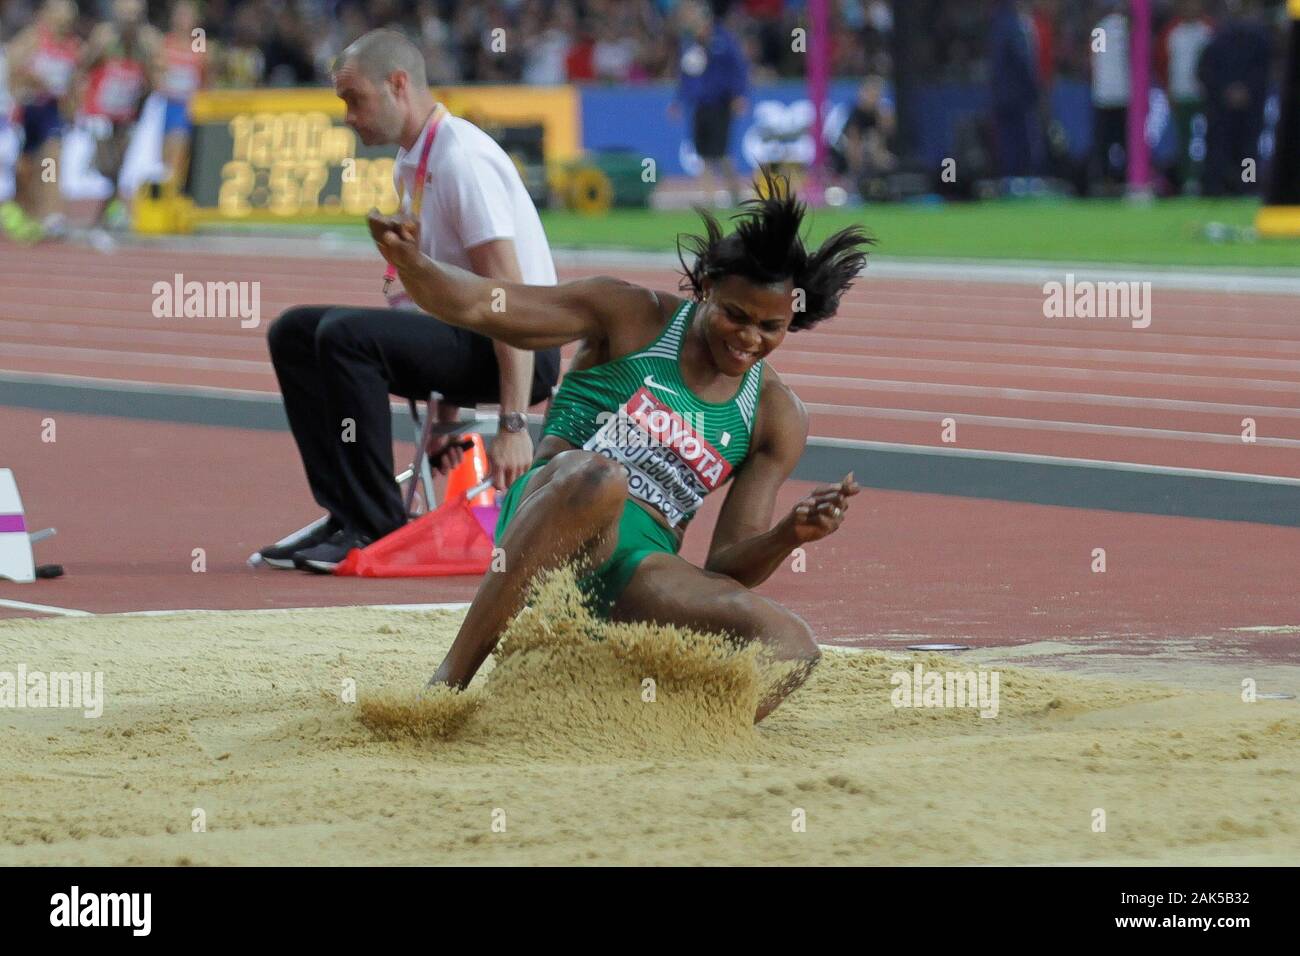 Olori Supergal - Nigeria's queen of the tracks, Blessing Okagbare, has set  yet another amazing record as she continued her splendid build-up to the  Tokyo Olympics, running an impressive 10.98 secs to